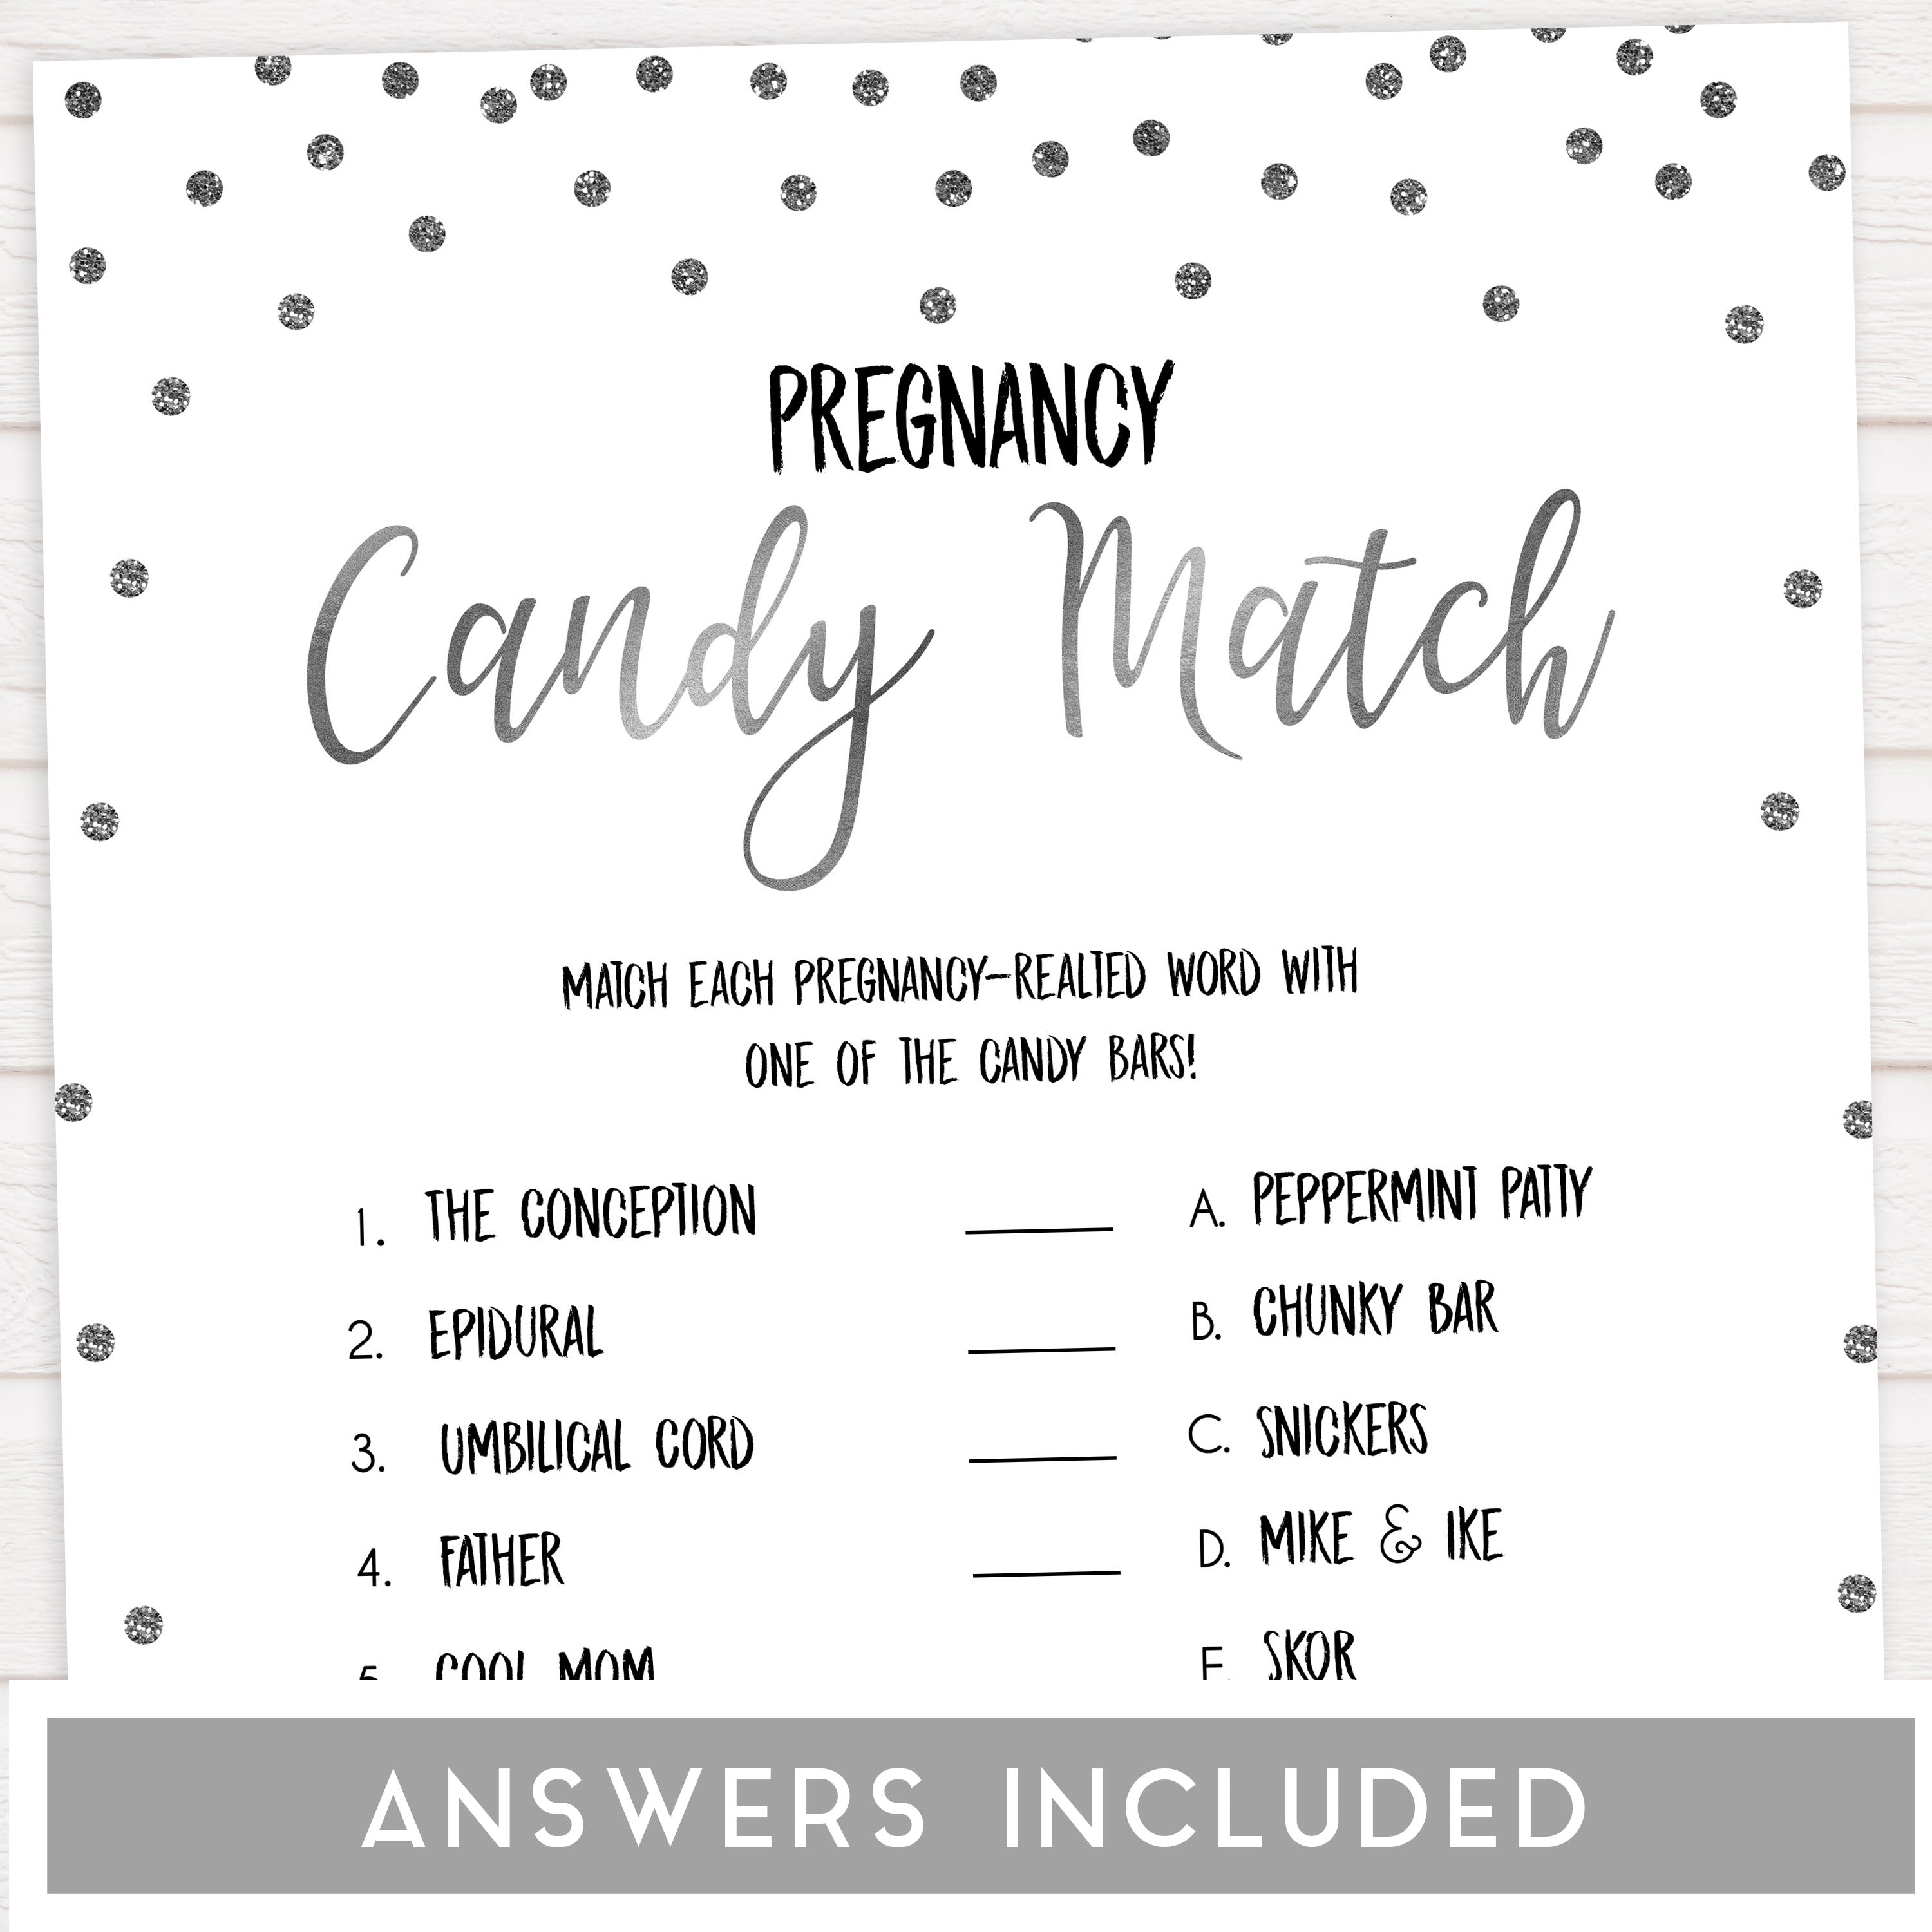 pregnancy candy match, Printable baby shower games, baby silver glitter fun baby games, baby shower games, fun baby shower ideas, top baby shower ideas, silver glitter shower baby shower, friends baby shower ideas